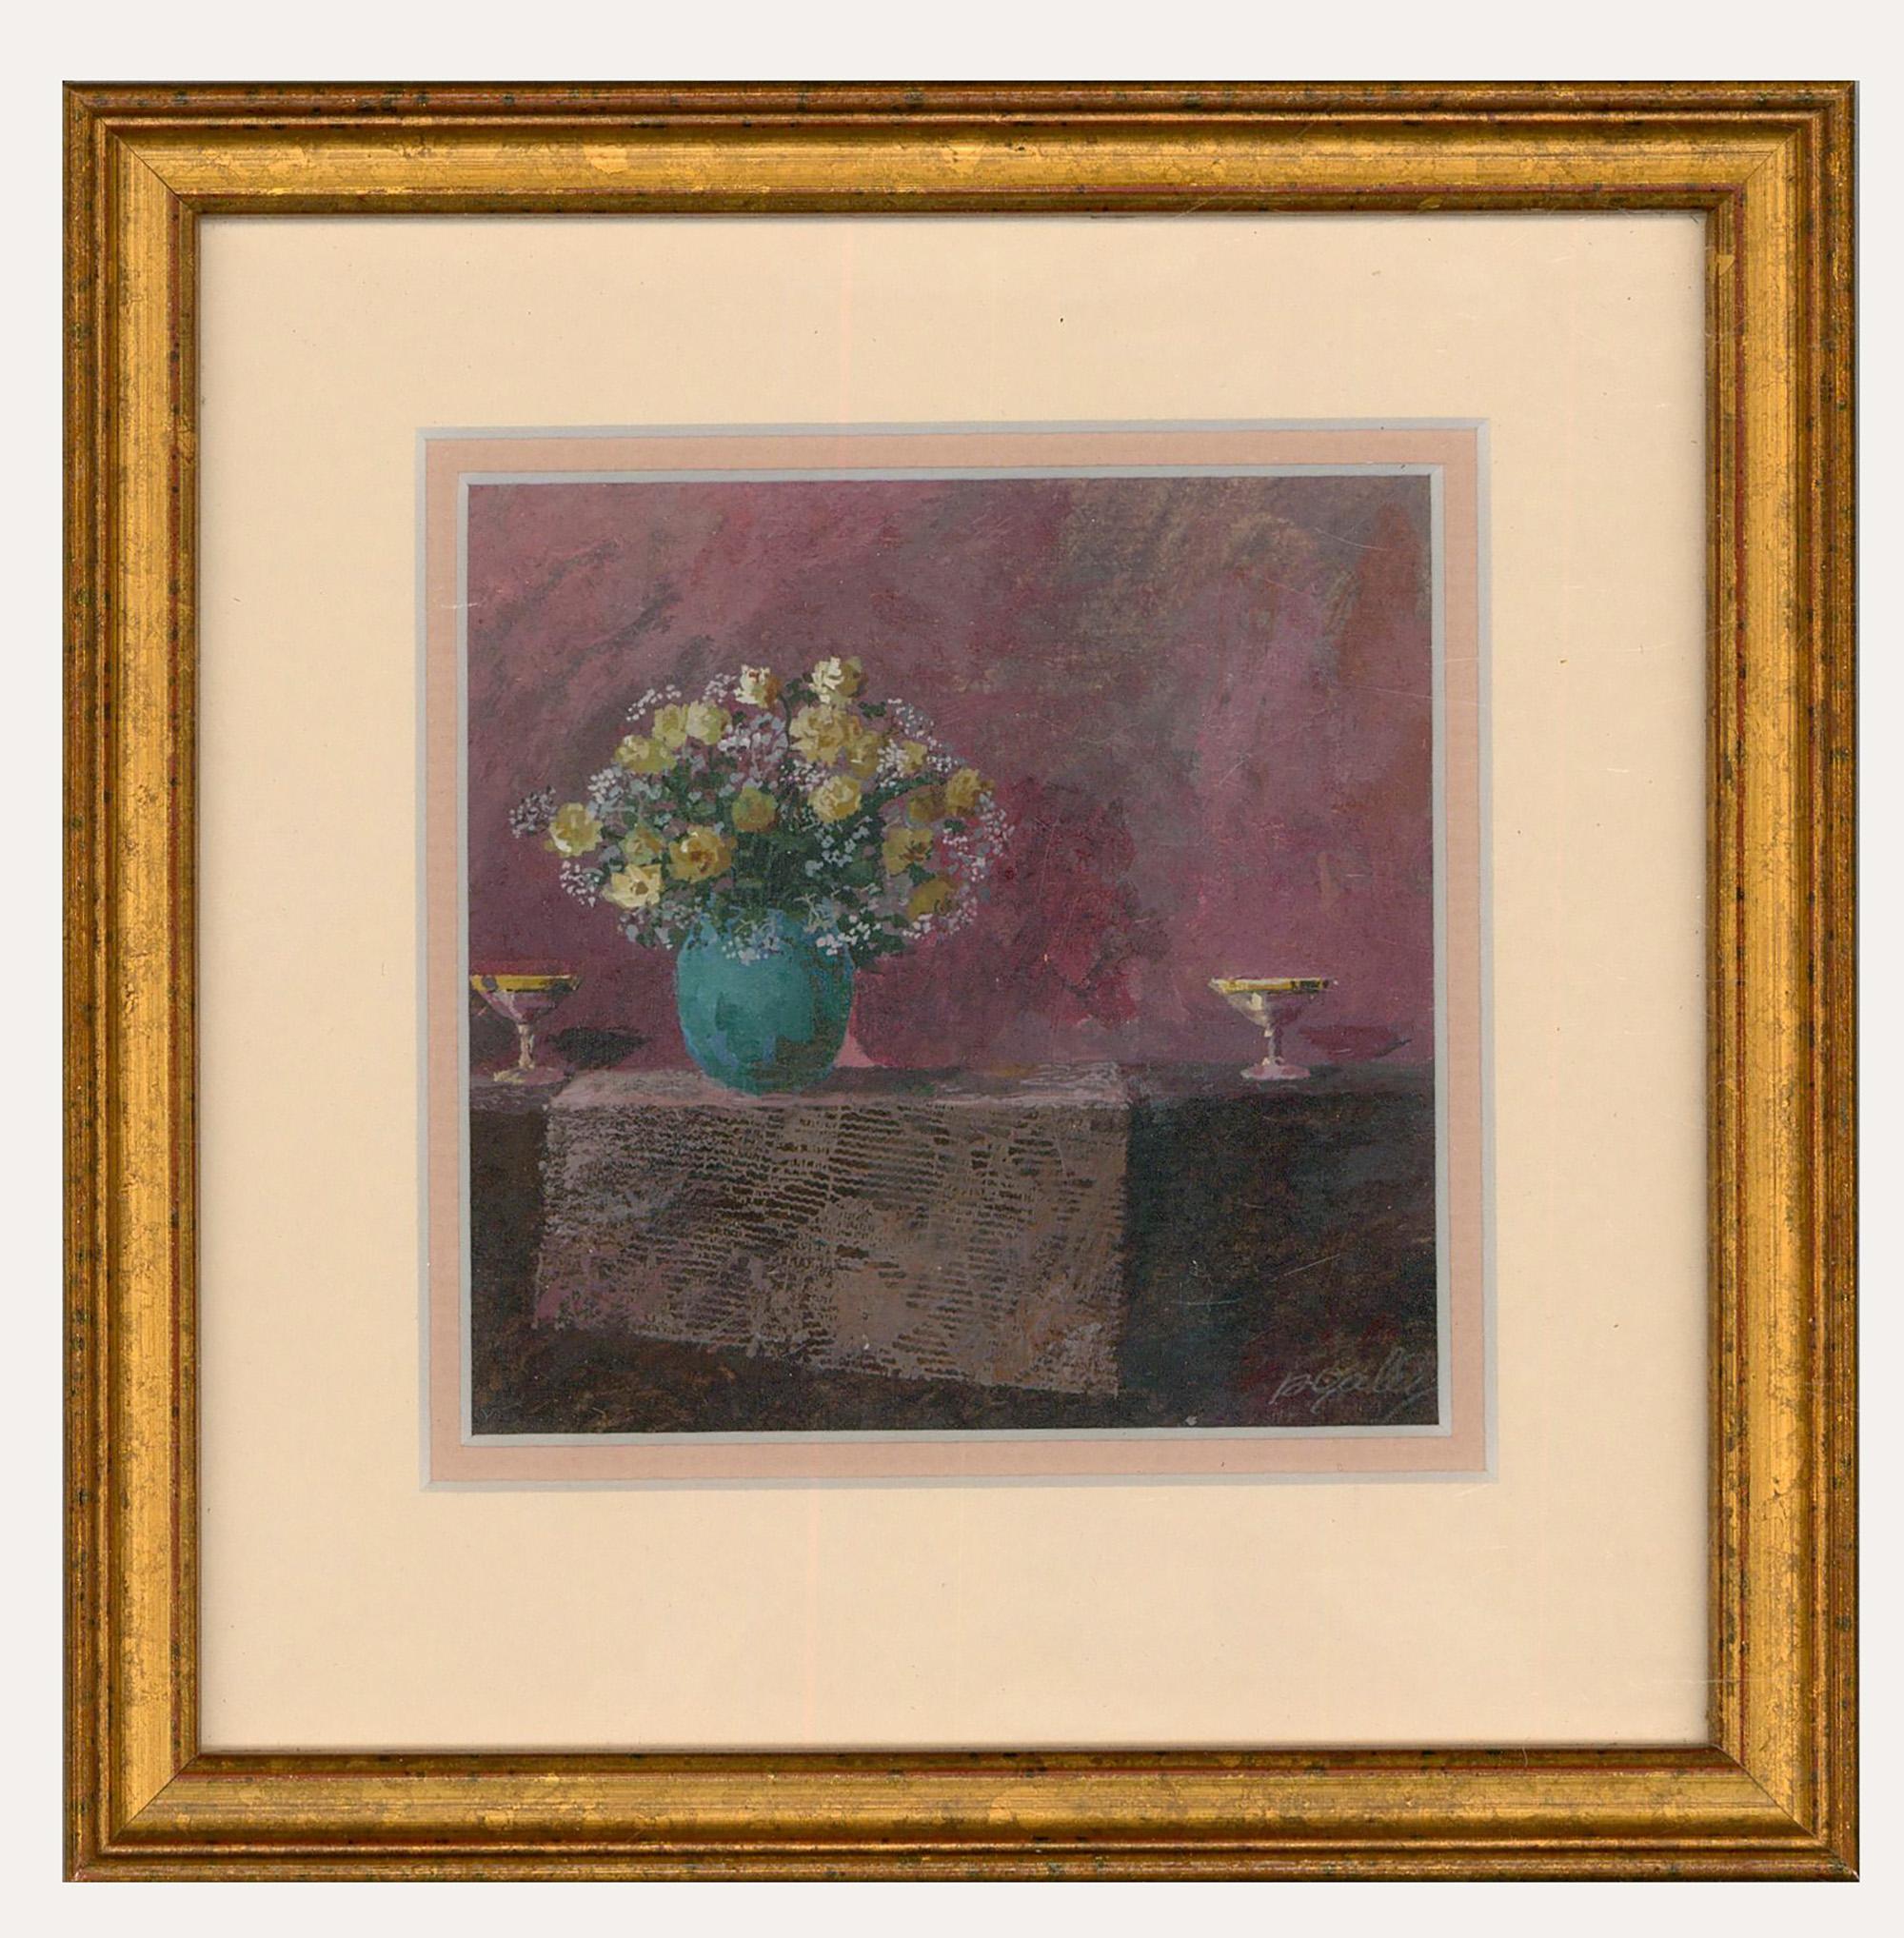 Unknown Still-Life Painting - Petru Galis - Framed Contemporary Oil, Still Life, Flowers & Champagne Glasses